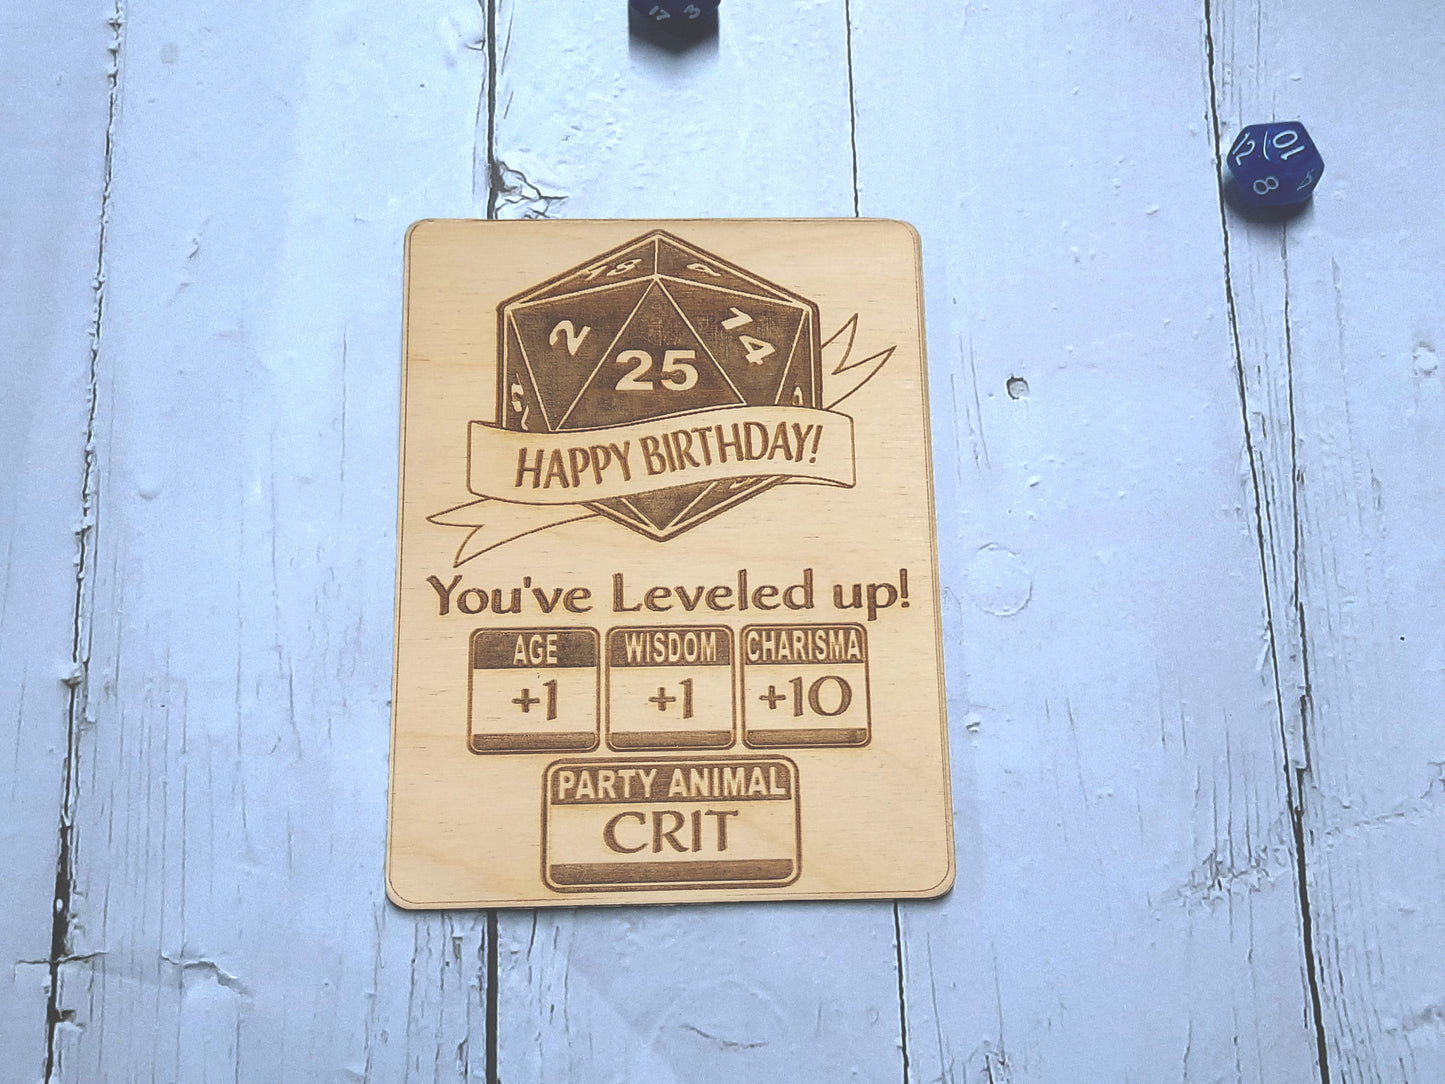 Birthday Card - Happy Birthday! You've Leveled Up!   Level Up Stats birthday card, engraved wood, gamer gift, rpg, role-playing games d&d